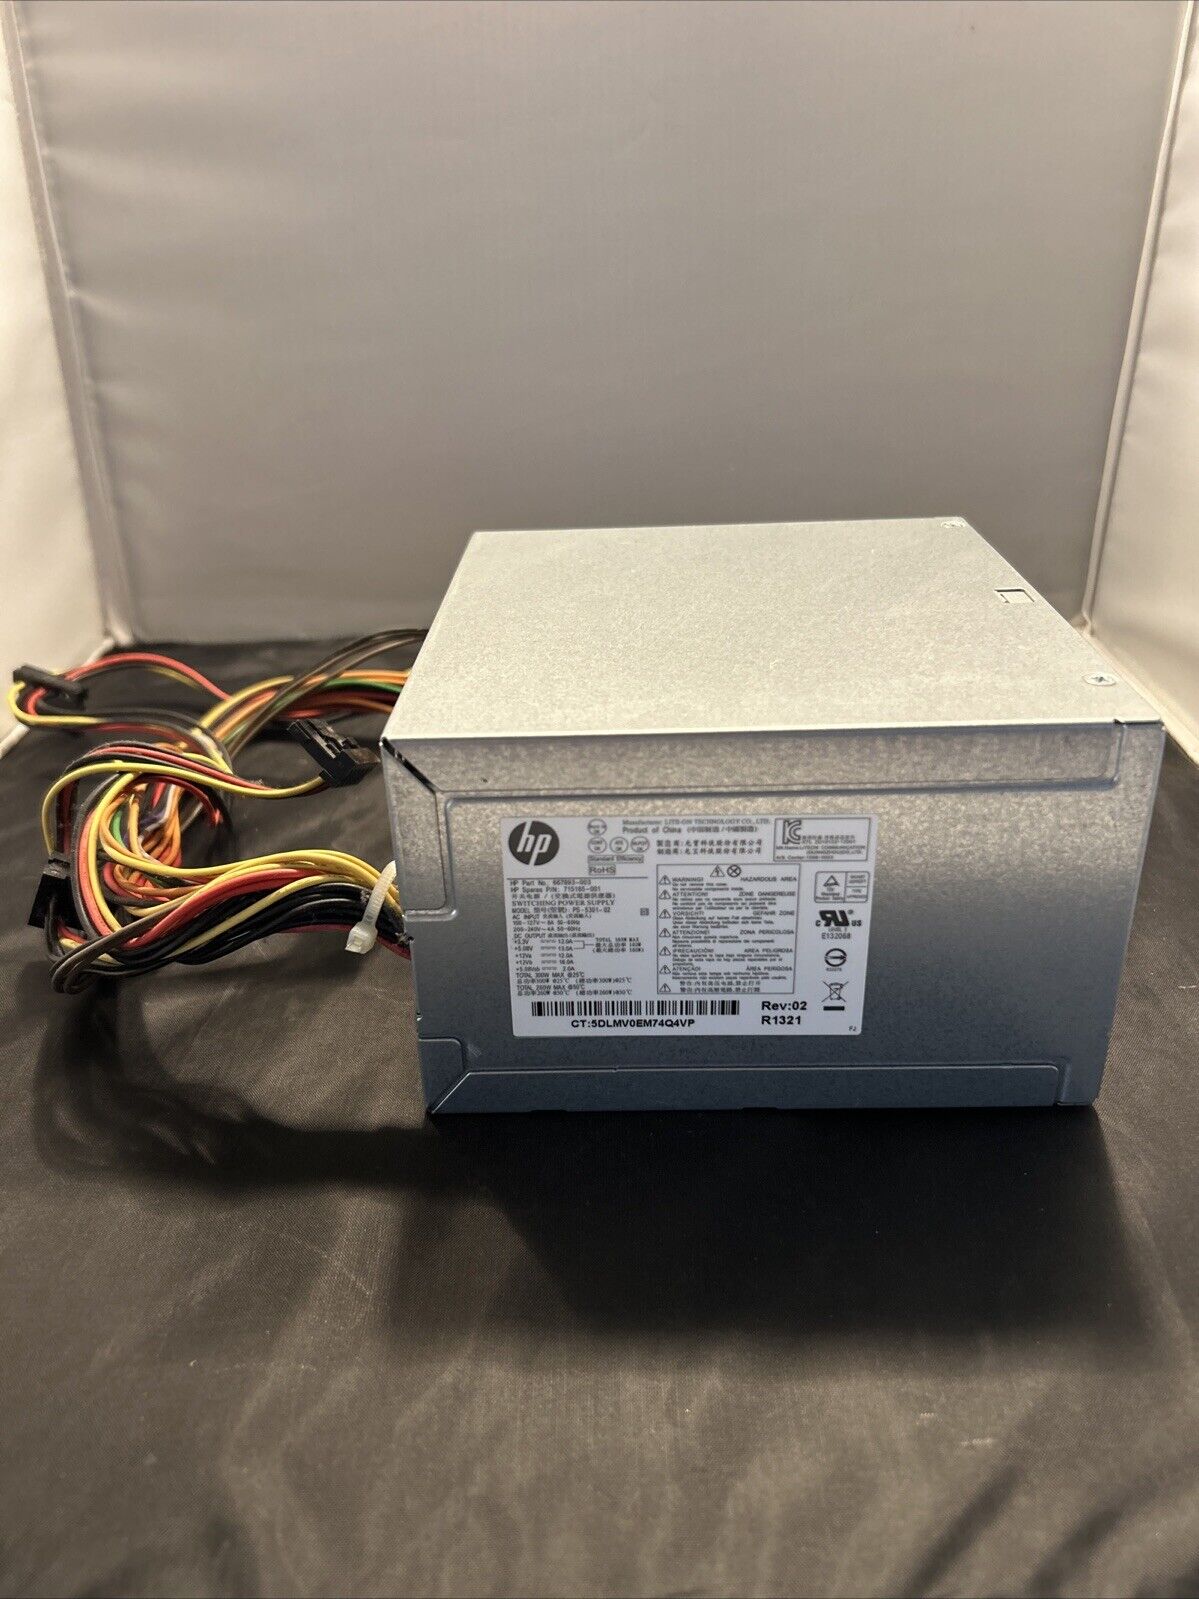 HP 300W 24-Pin Switching Power Supply D11-300N1A 667893-003 715185-001